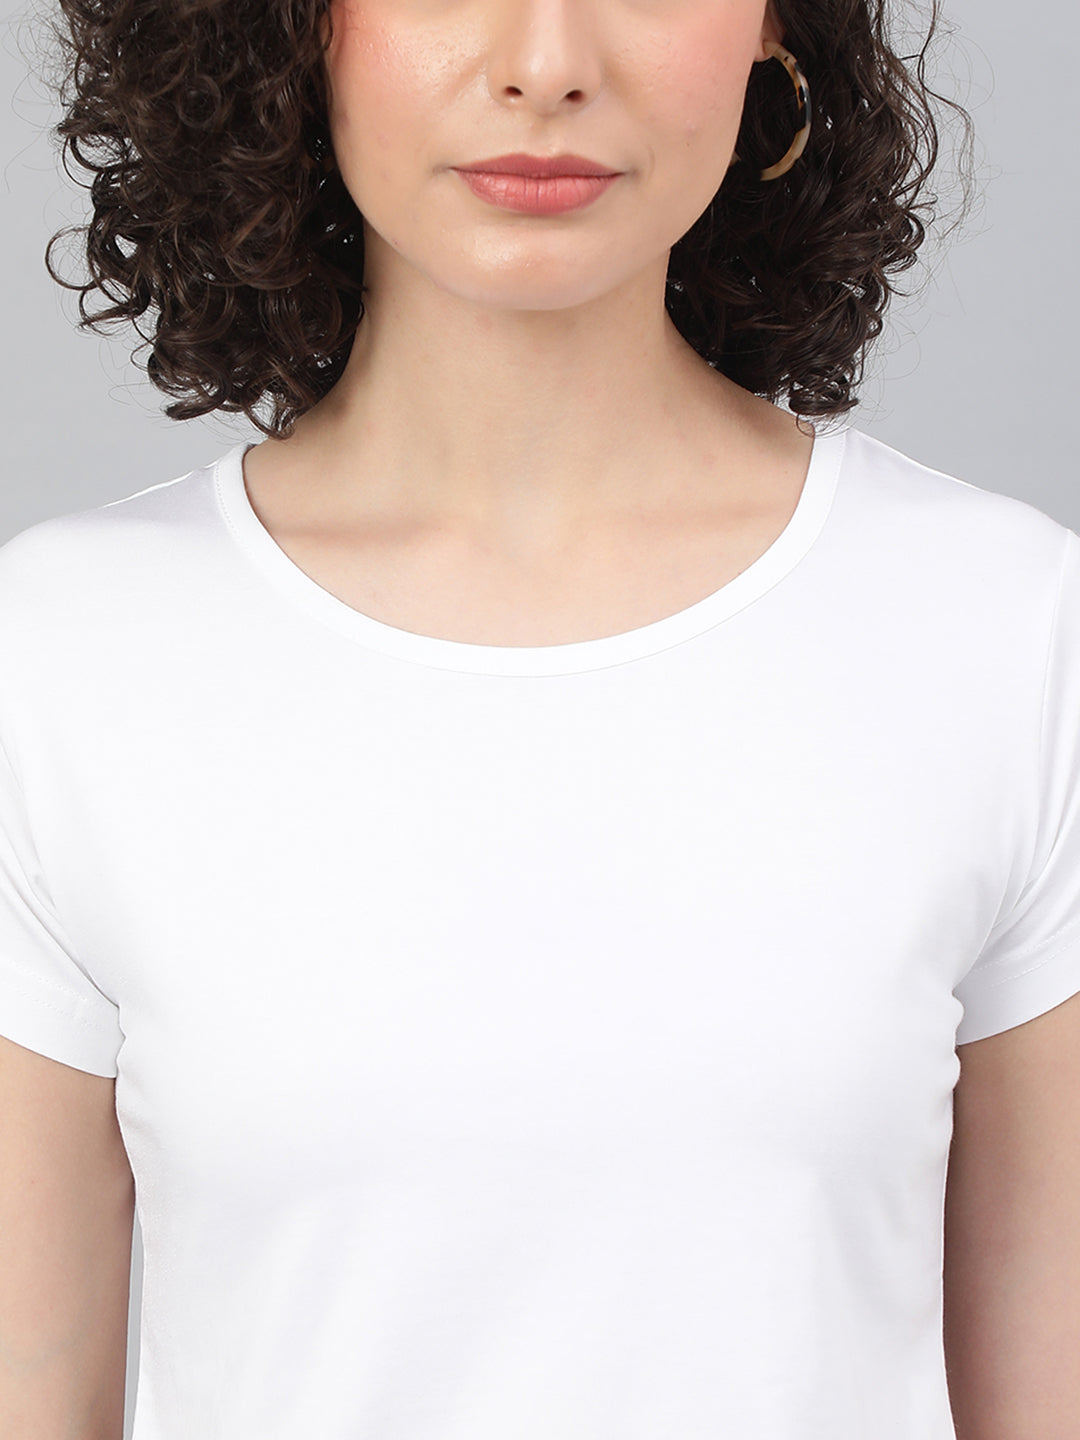 Supima Cotton White T-shirts for women - BeSimple